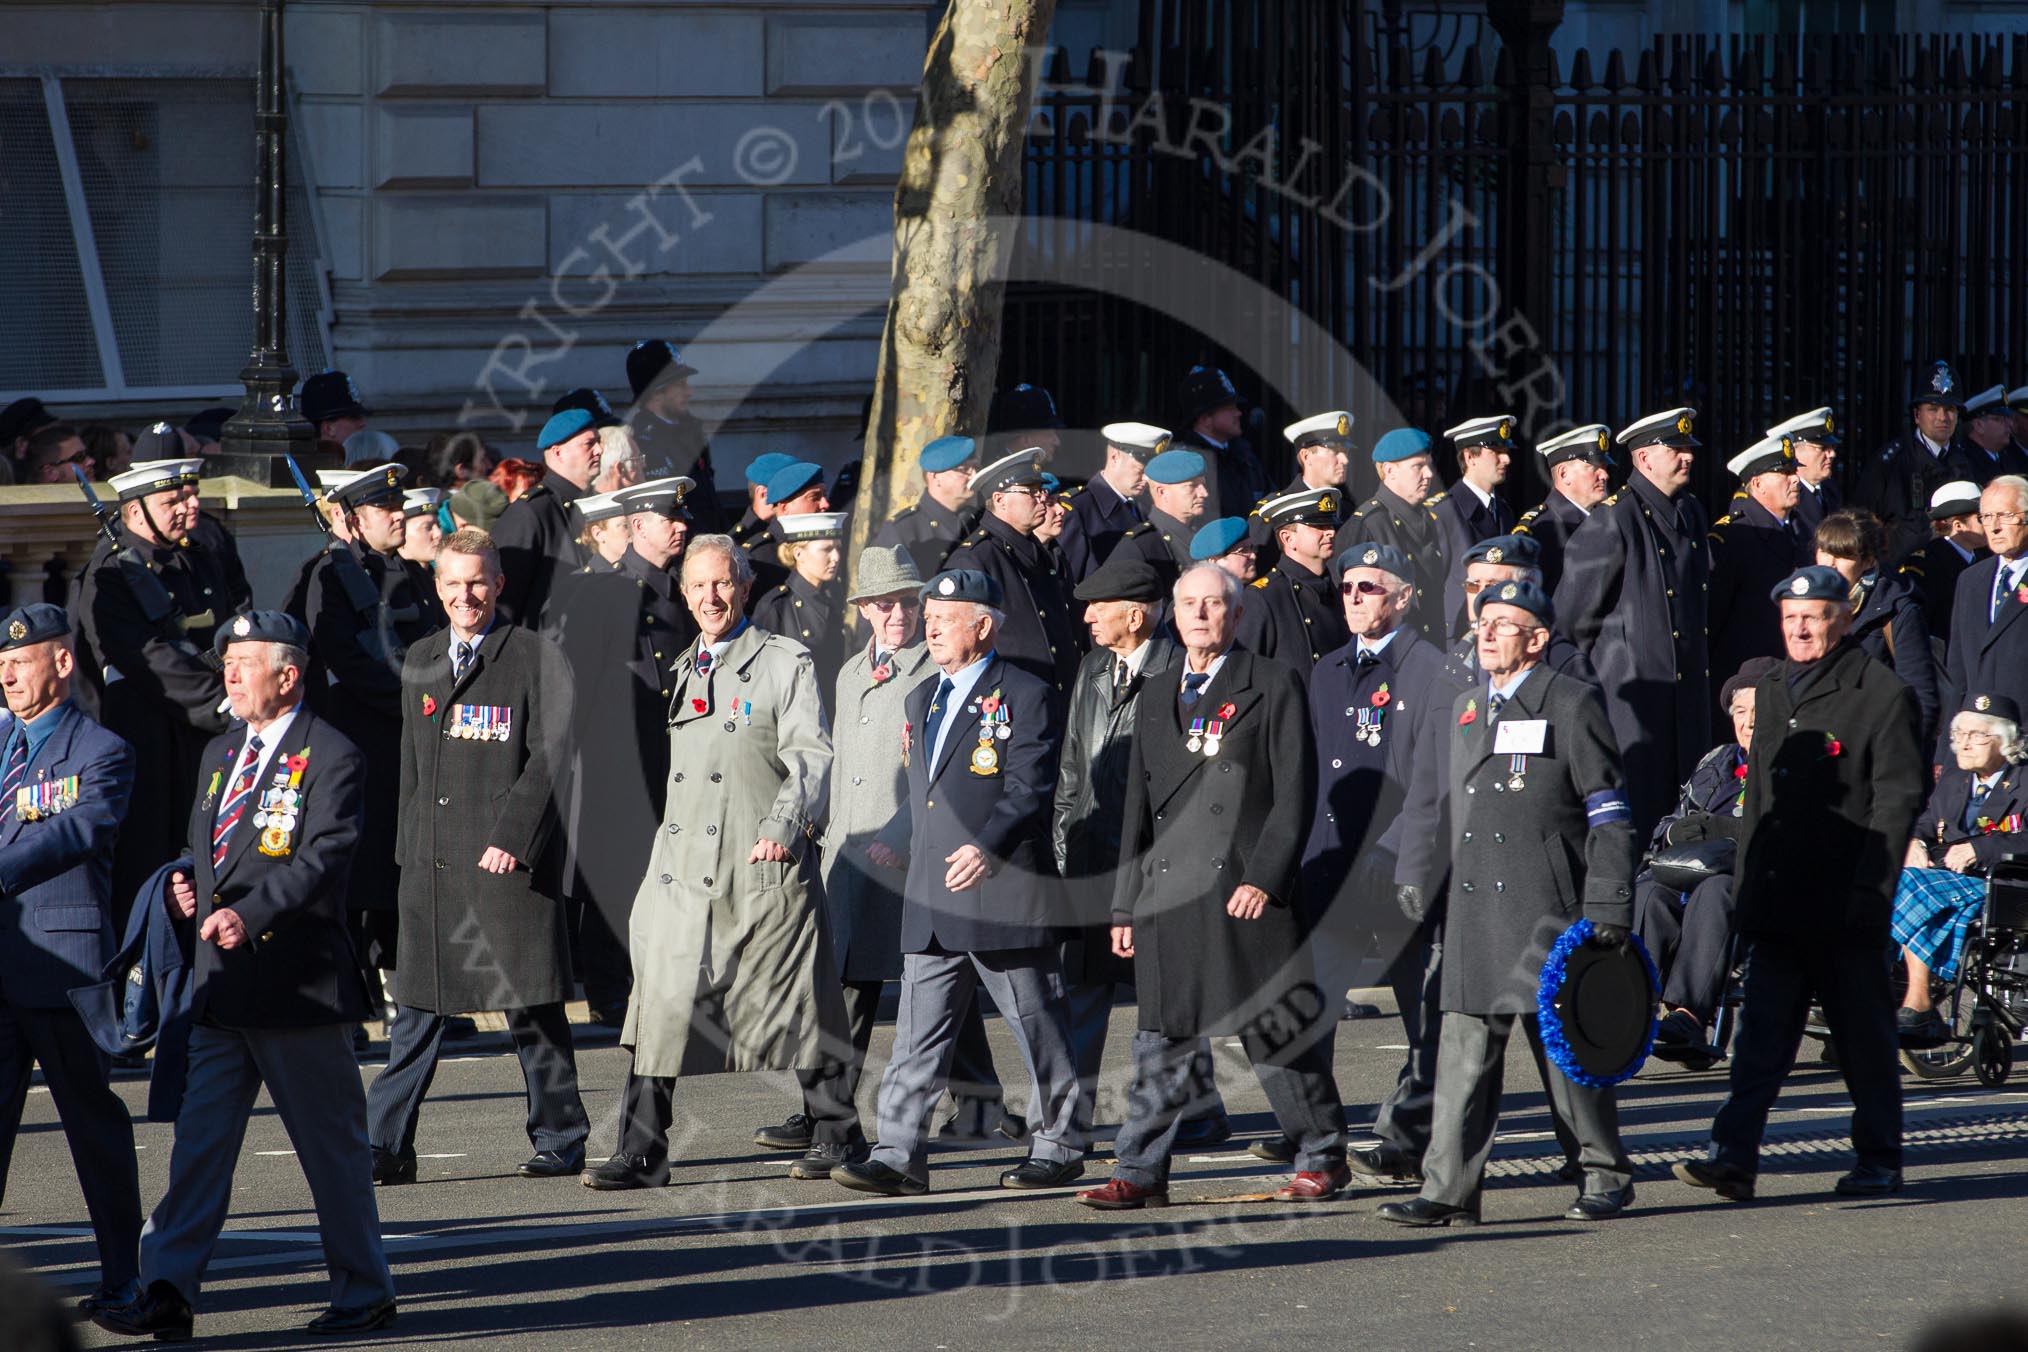 Remembrance Sunday 2012 Cenotaph March Past: Group C4 - Royal Air Force Yatesbury Association, C5 - Royal Air Force Airfield Construction Branch Association, and C6 - Women's Auxiliary Air Force..
Whitehall, Cenotaph,
London SW1,

United Kingdom,
on 11 November 2012 at 12:01, image #1094